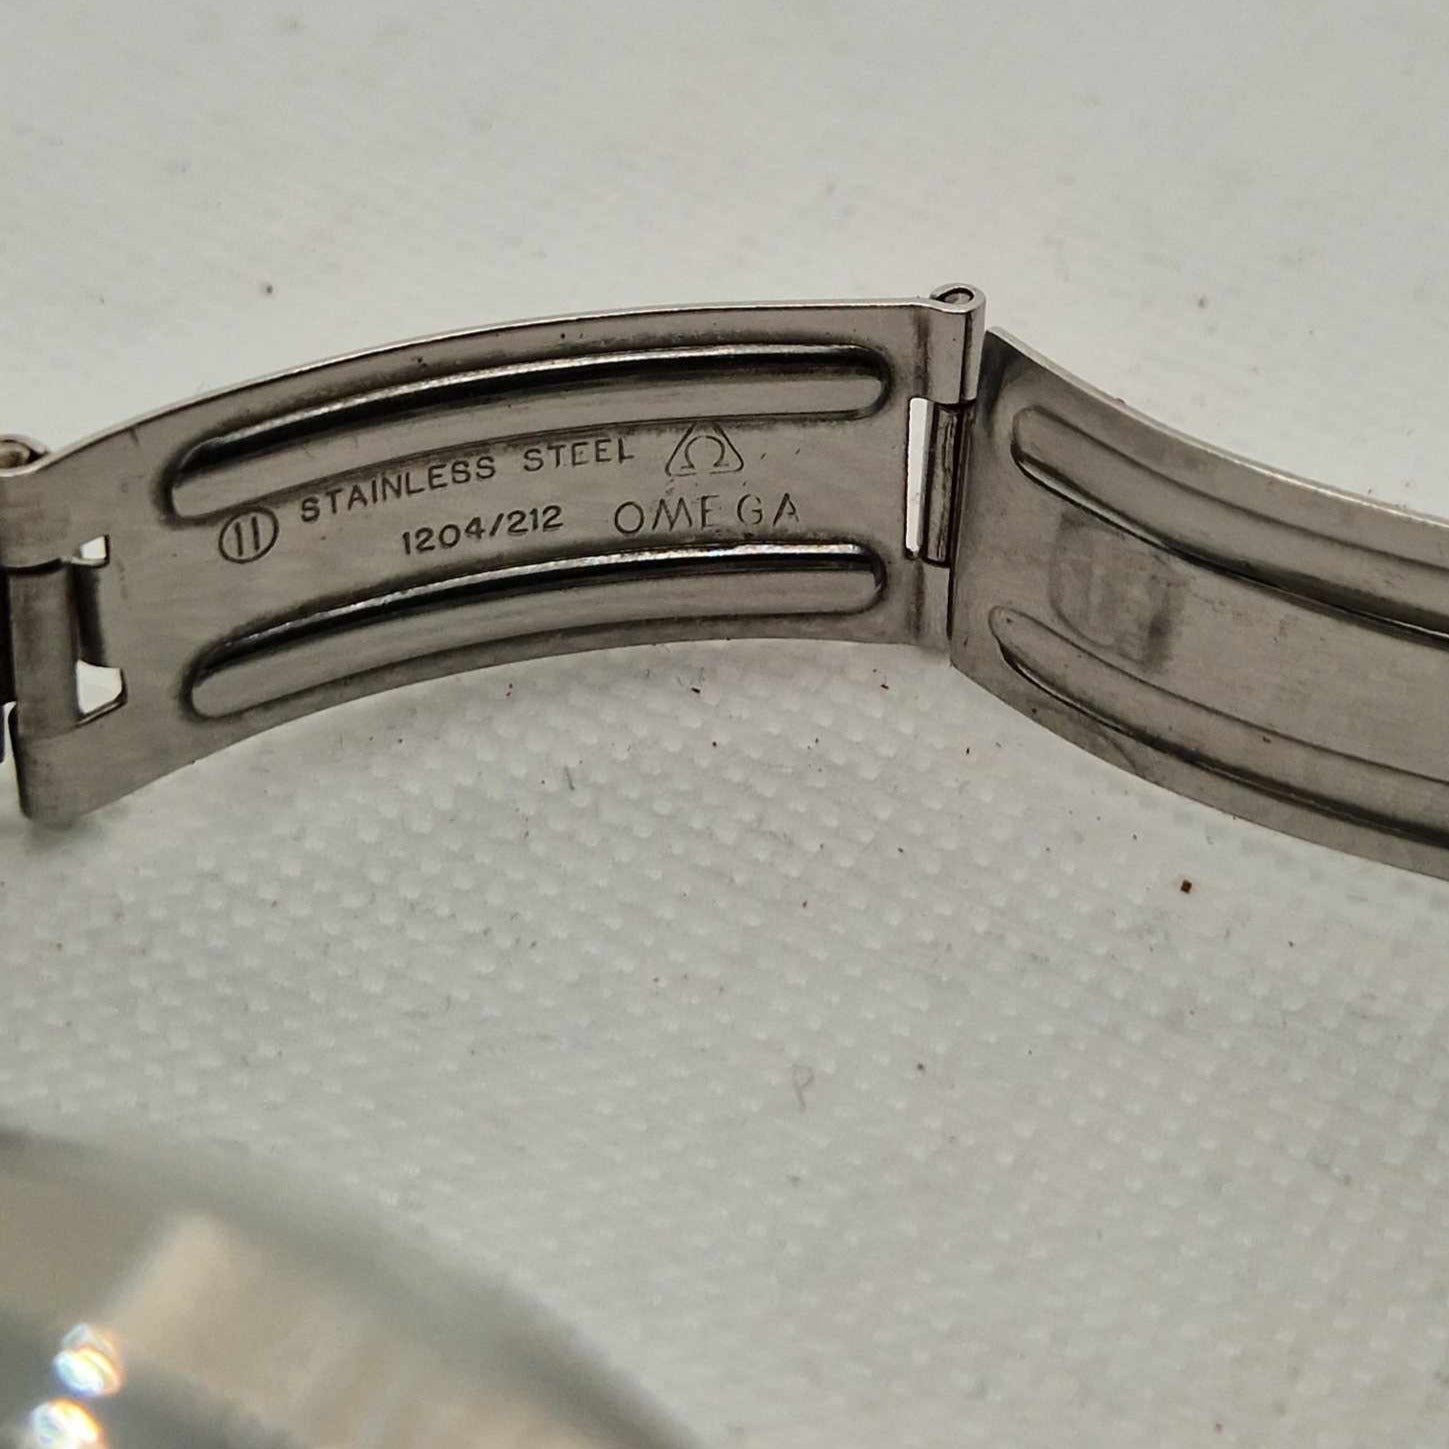 Original stainless steel bracelet with original OMEGA inprints and engravings